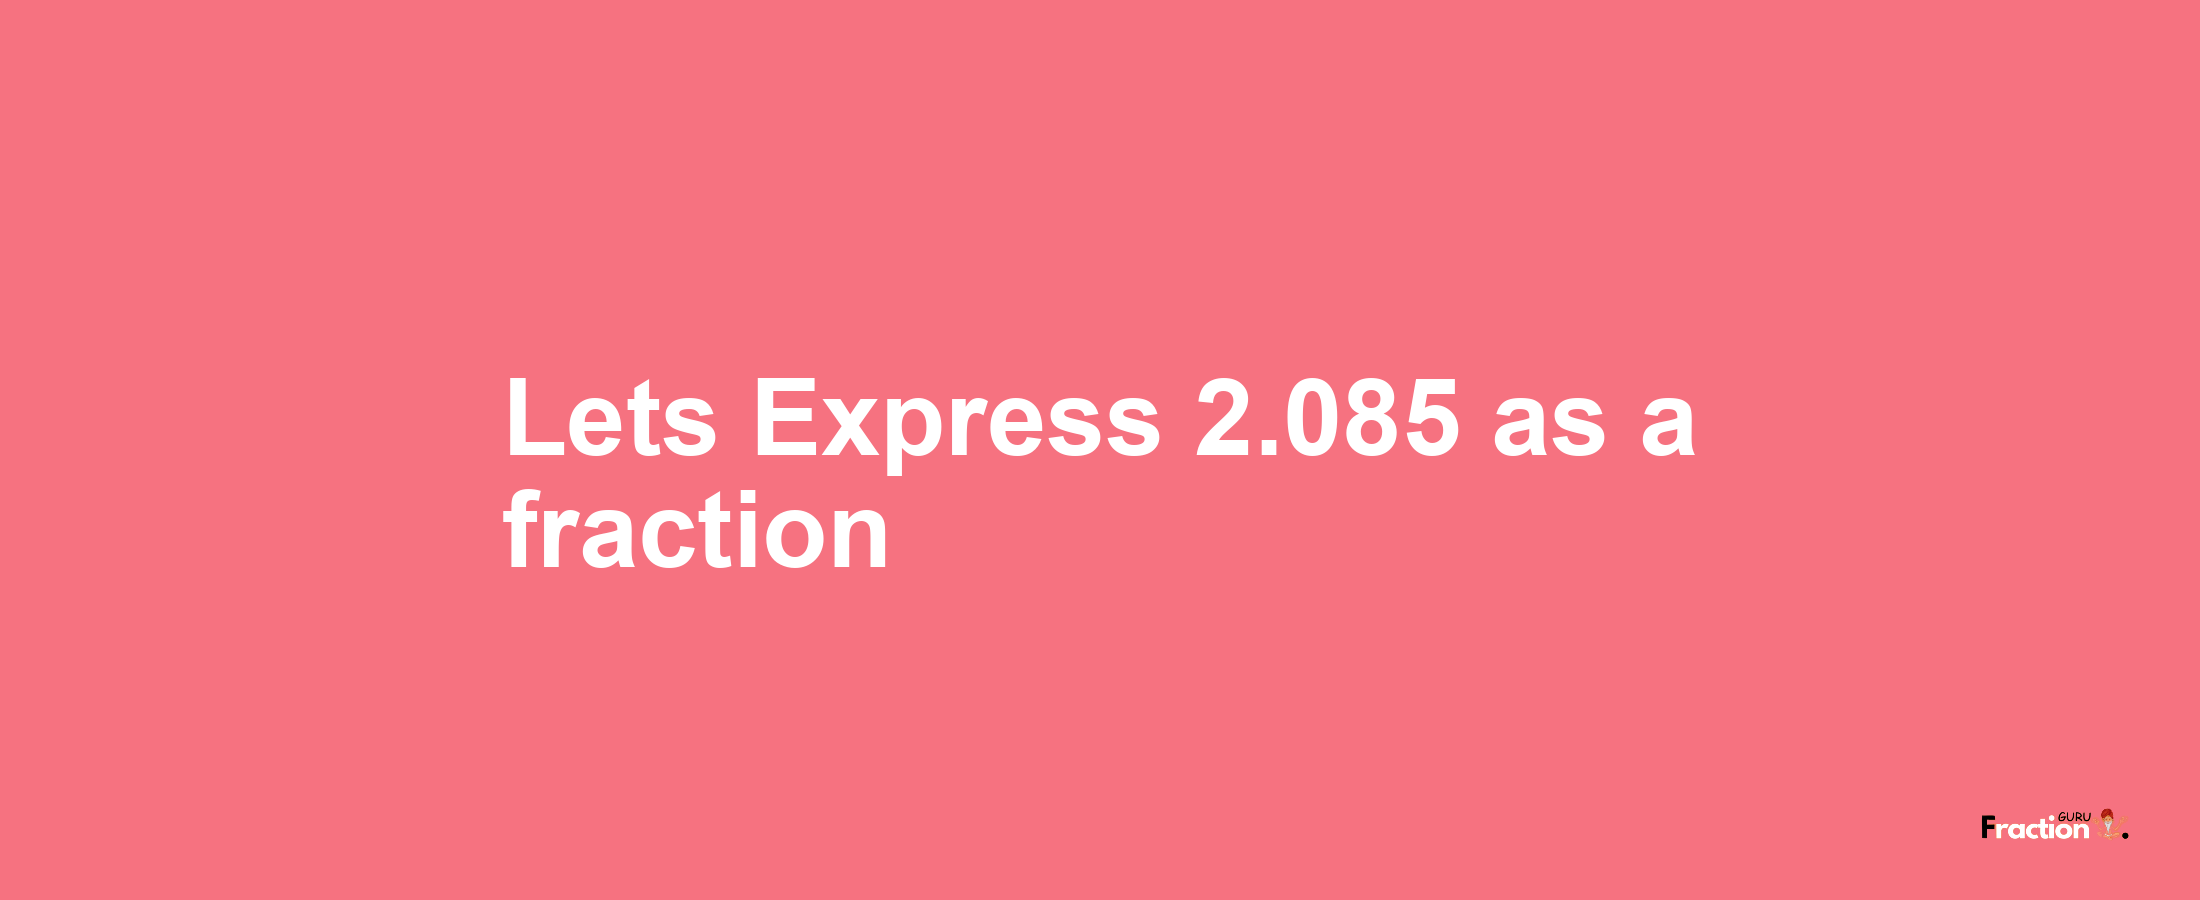 Lets Express 2.085 as afraction